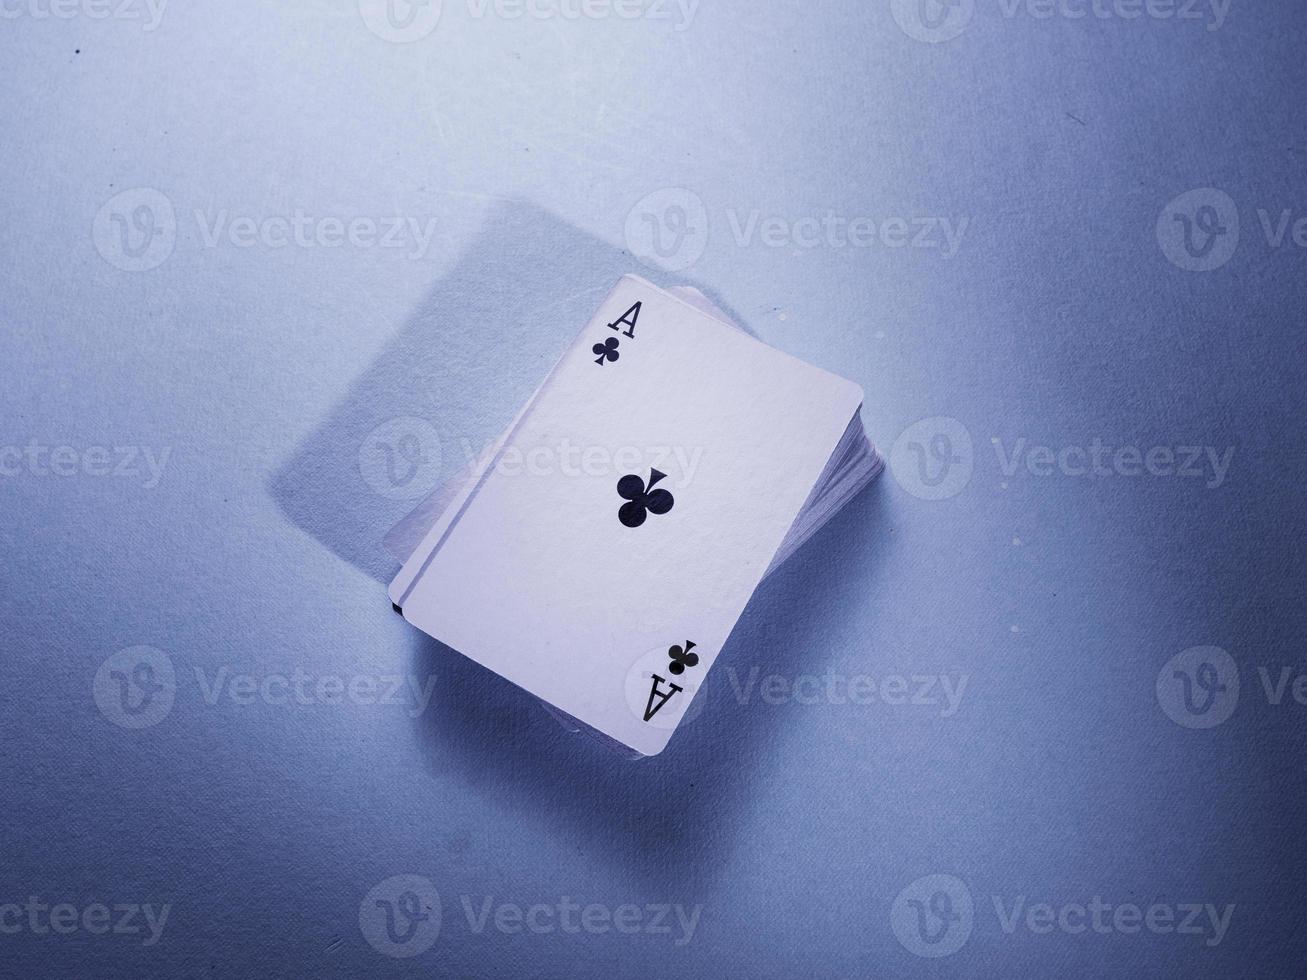 Set of a playing cards photo